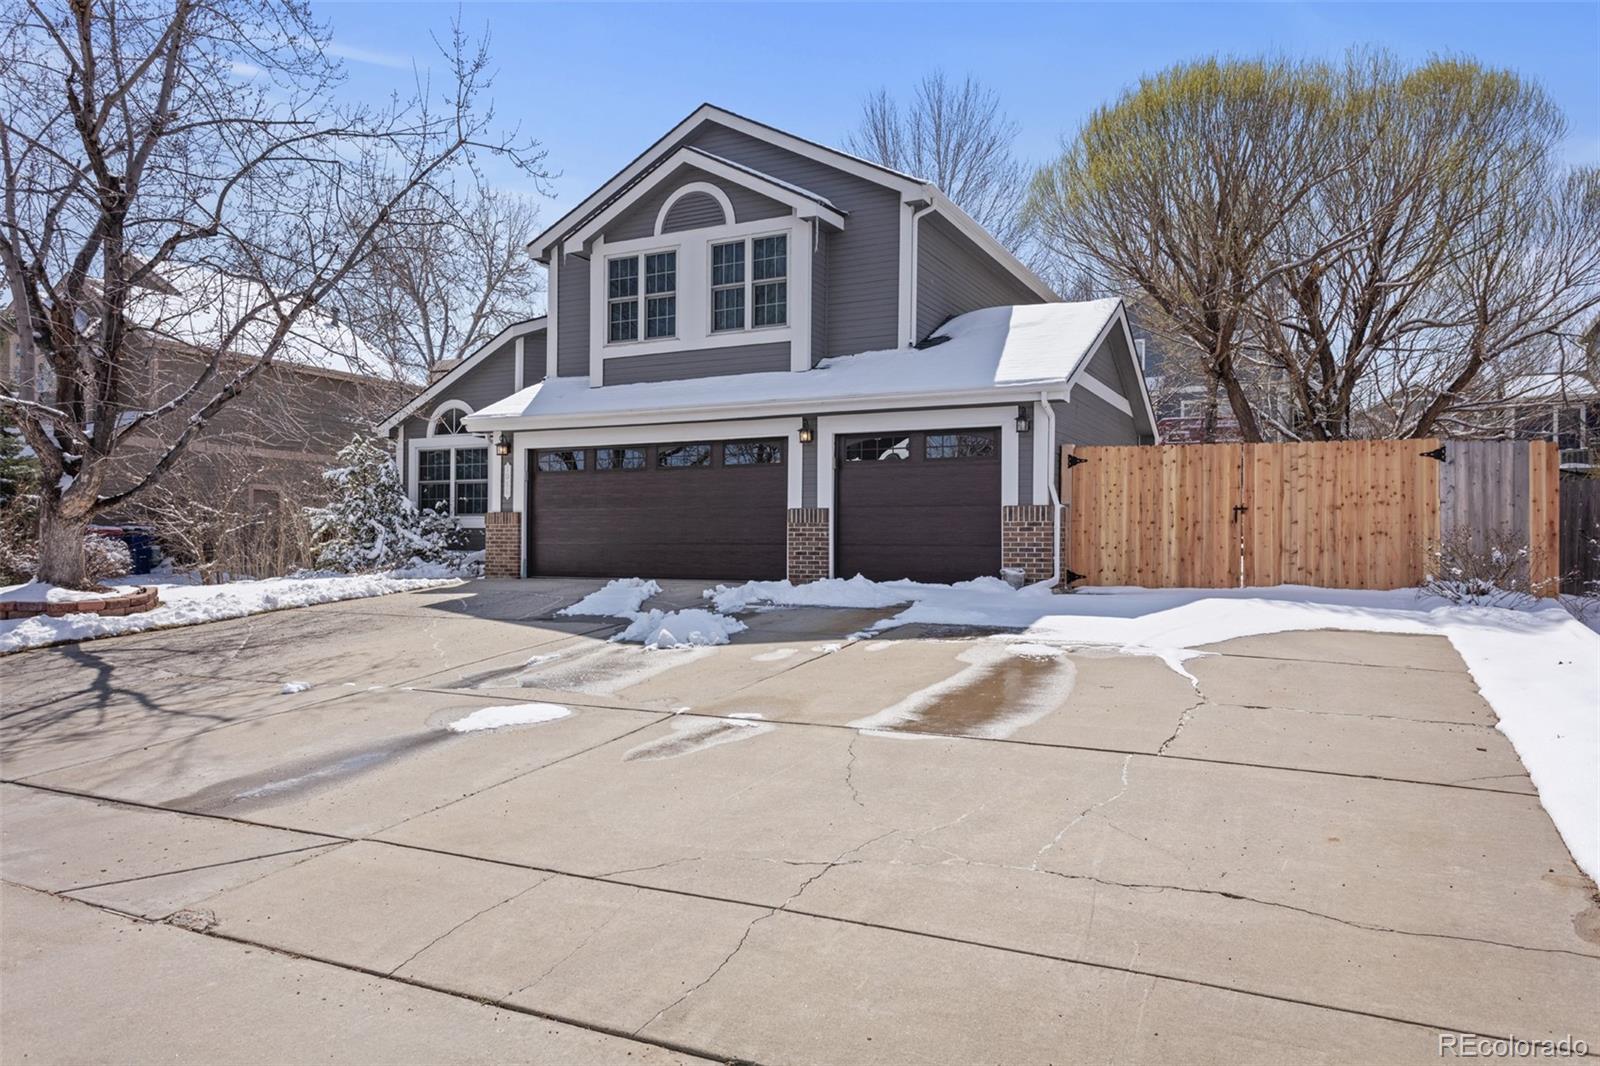 Report Image for 1086  Highland Park Drive,Broomfield, Colorado